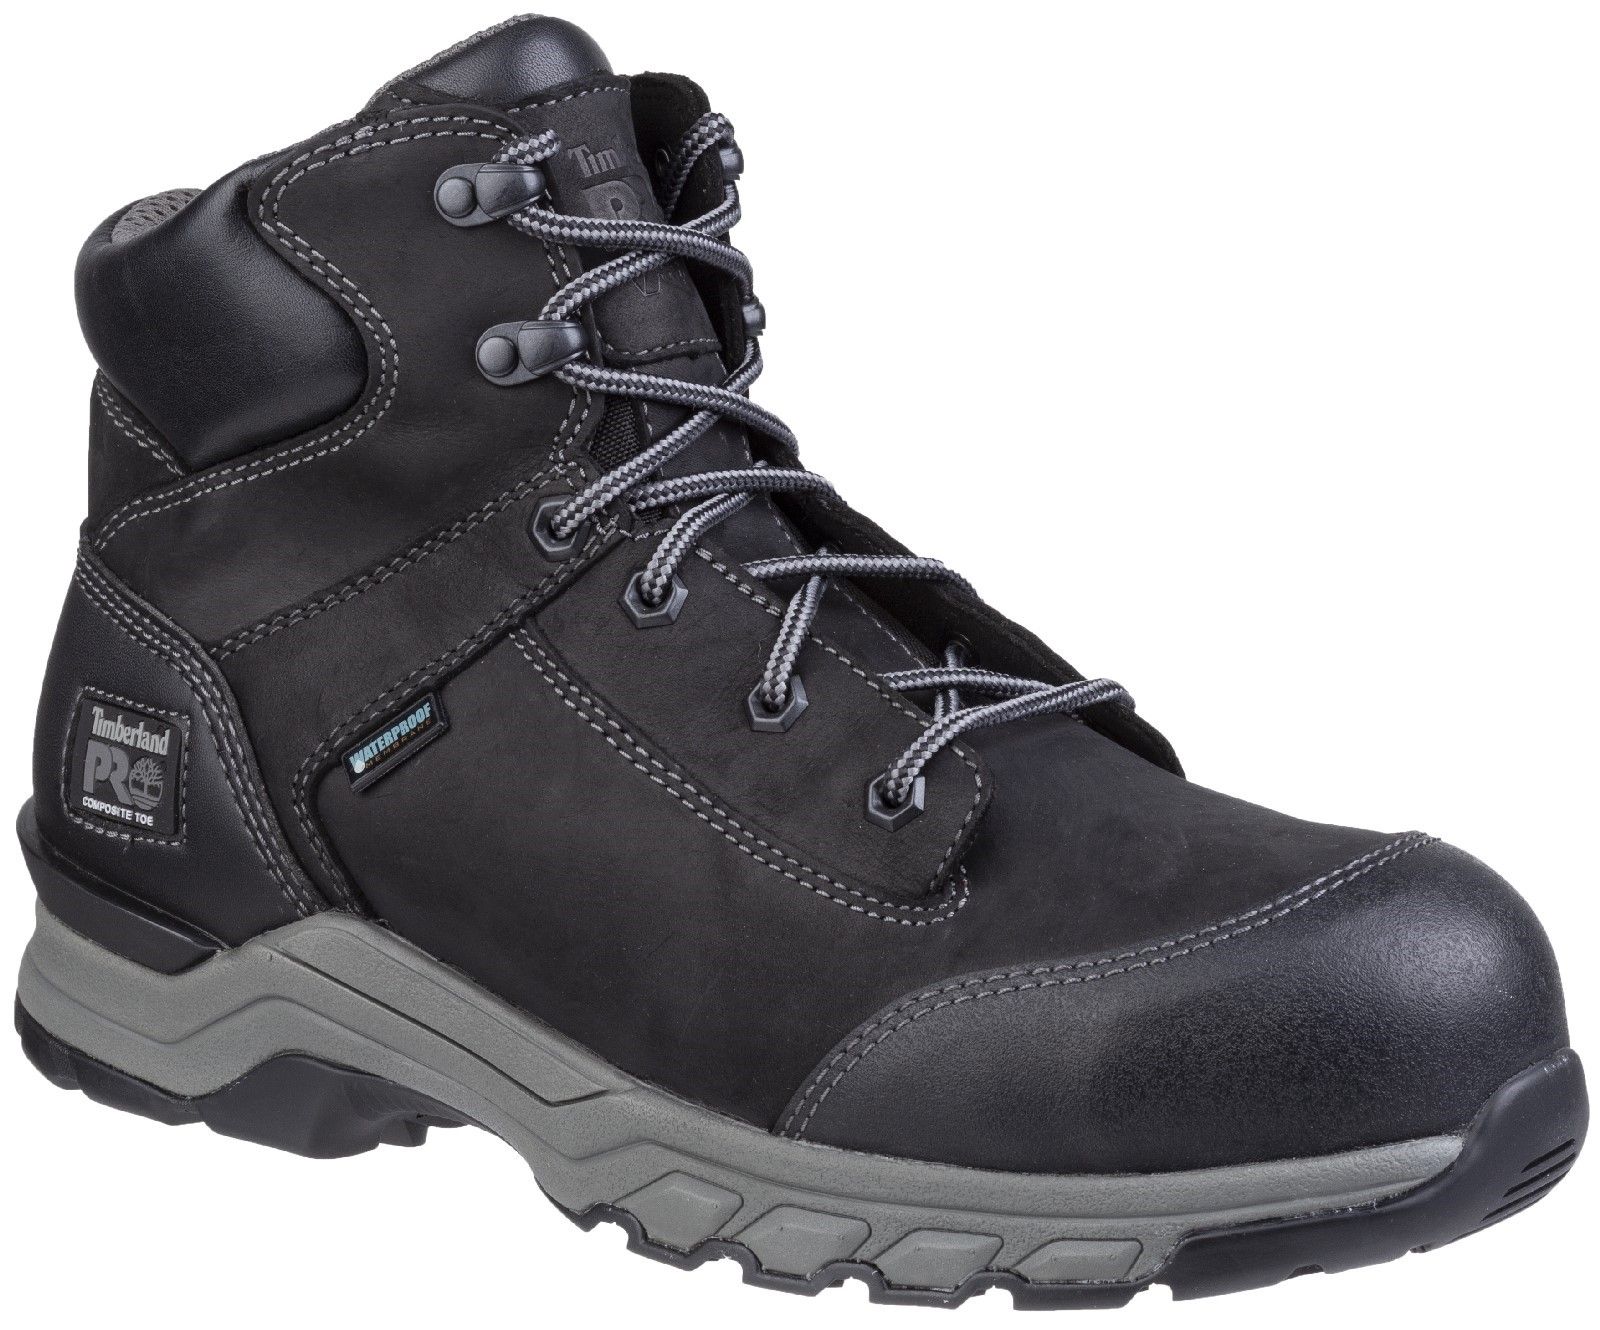 Hypercharge lace up waterproof boot with impact and compression resistant toe cap, puncture resistant plate with anti-fatigue footbed for comfort and independent suspension multi-density rubber outsole for added layer of comfort and stability.ISN technology for added layer of comfort & stability. 
Waterproof. 
Slip Resistant SRC Rubber Outsole. 
Heat Resistant HRO. 
Dynamic Anti-fatigue footbed.